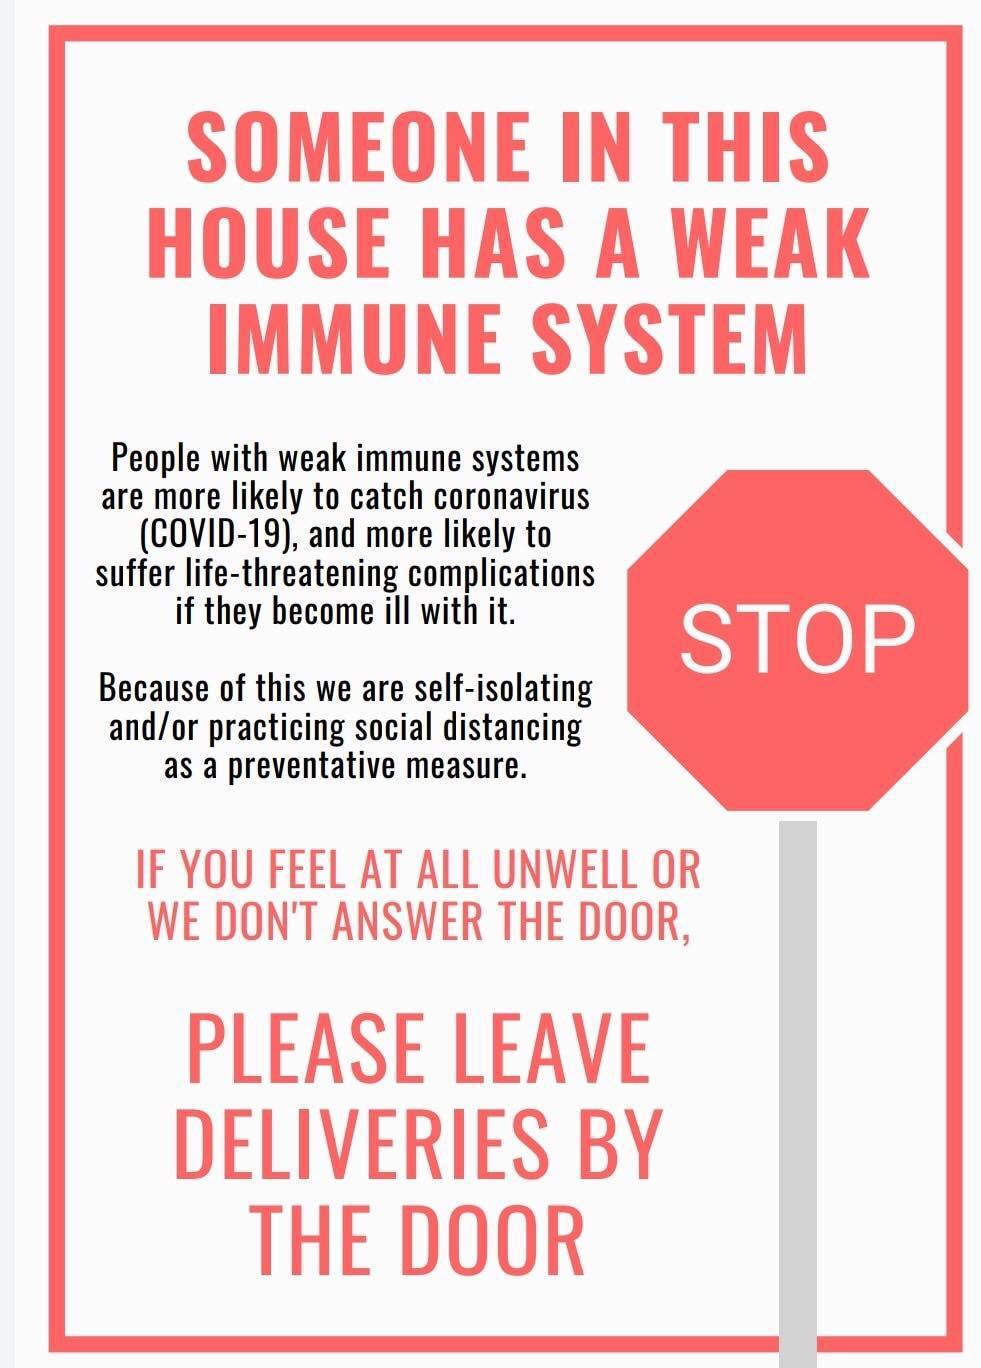 A sign on the Osterhout's front door that says "someone in this house has a weak immune system."